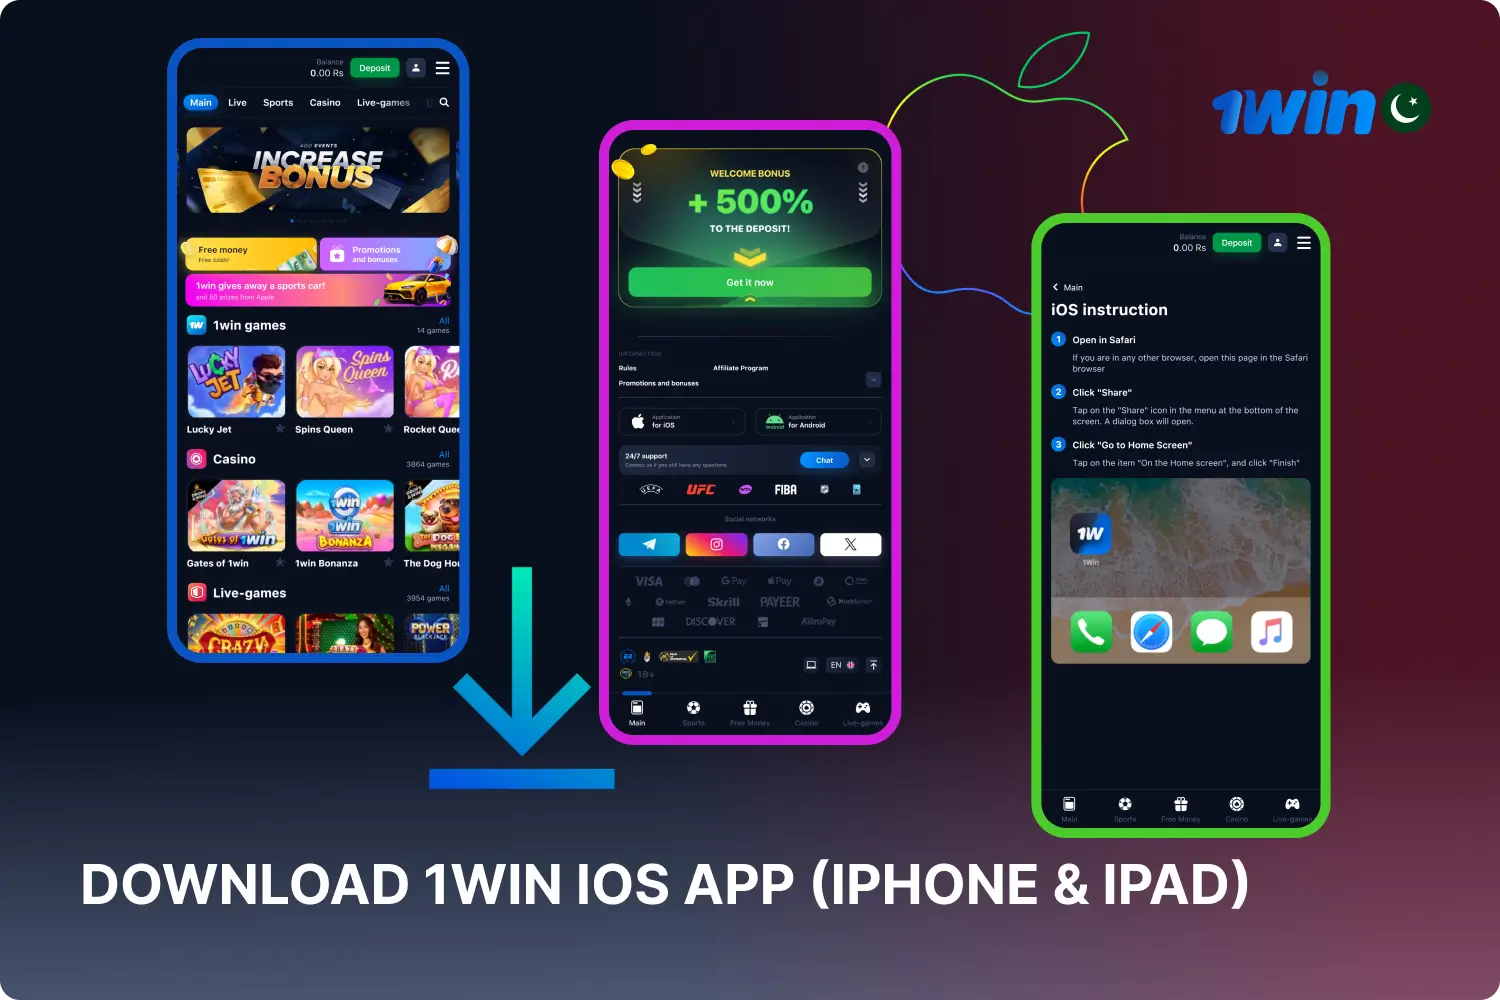 The 1win mobile application for iOS can be downloaded in a few simple steps